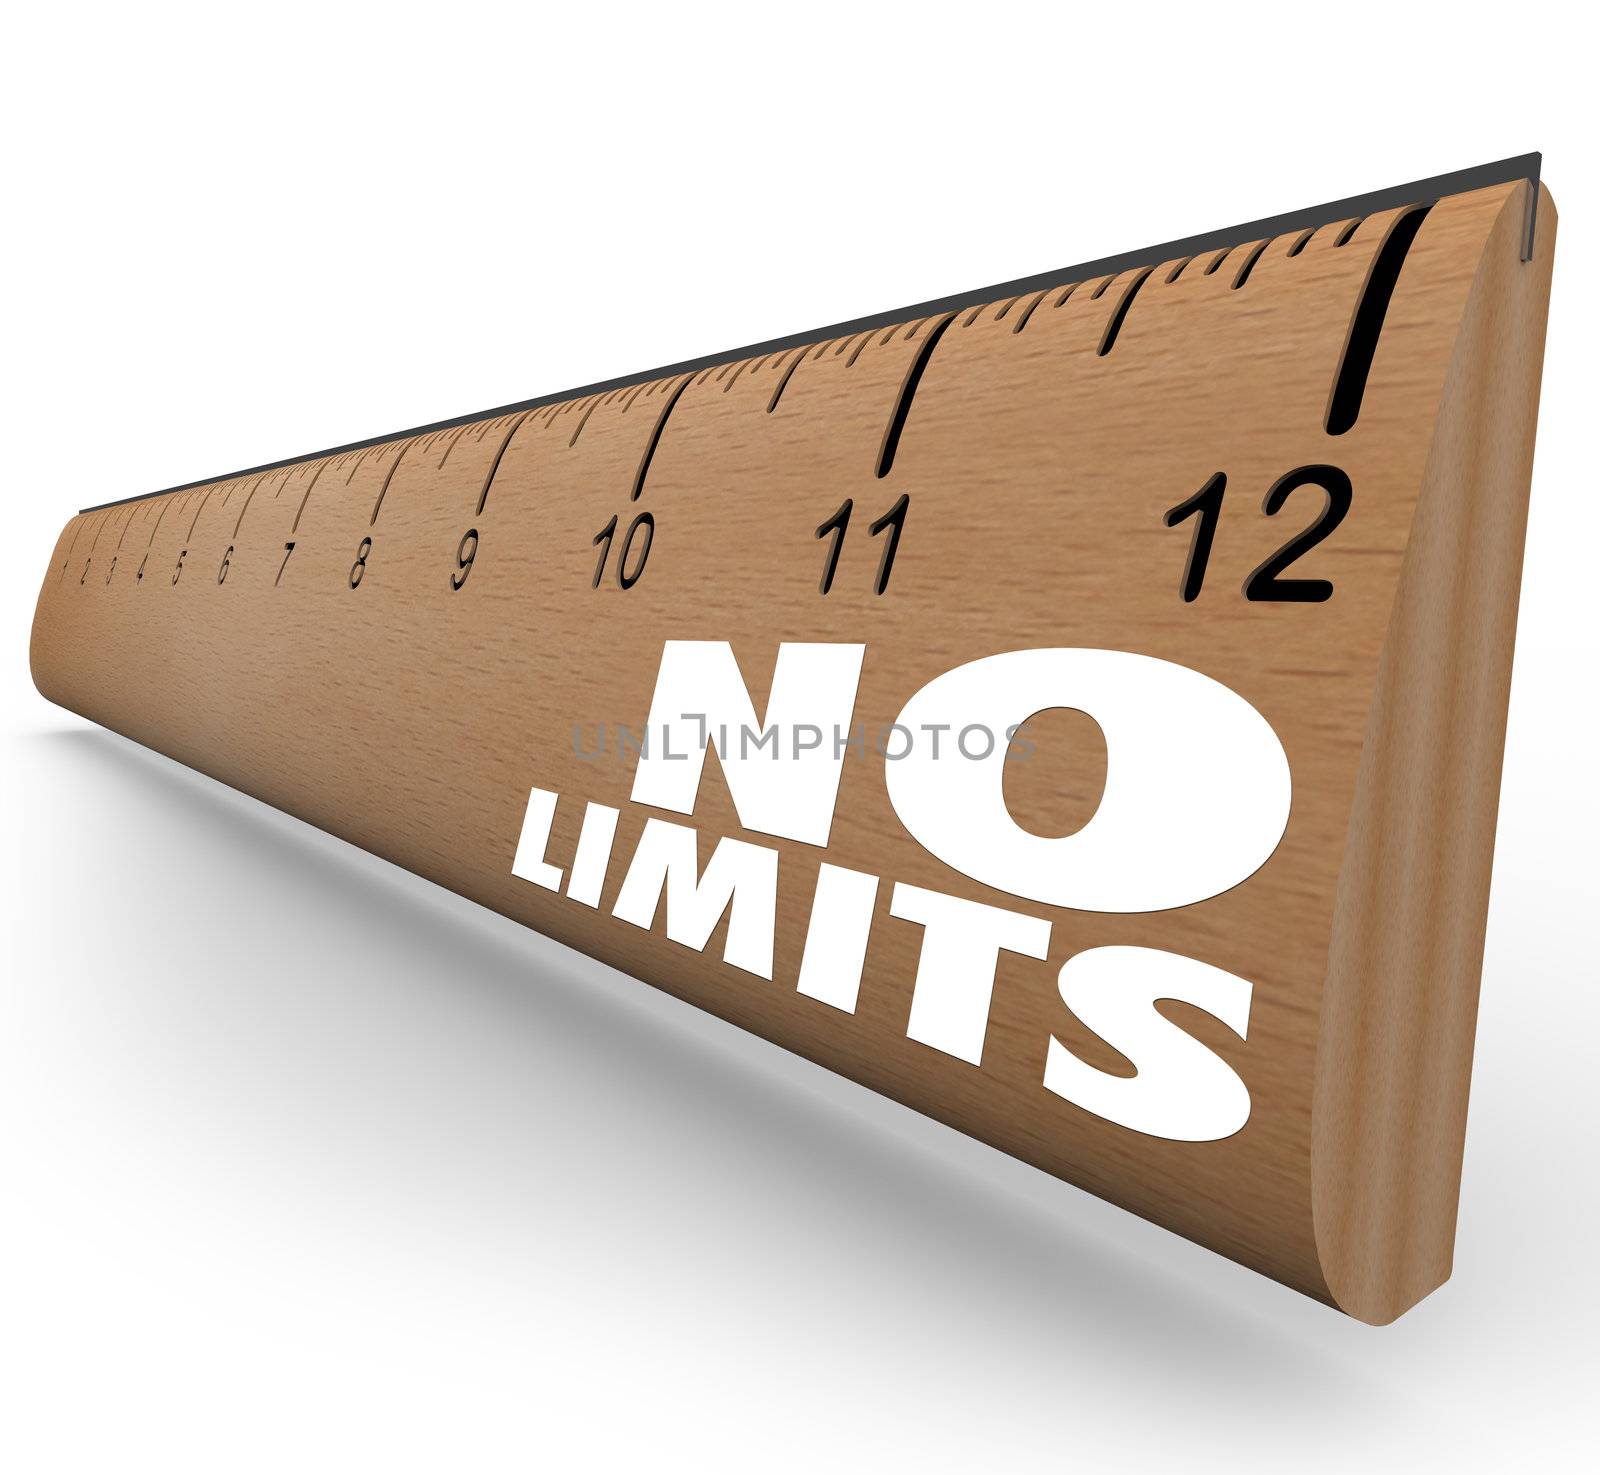 The words No Limits on a ruler illustrates the unlimited potential of an opportunity and the great possibilities of surpassing your goals